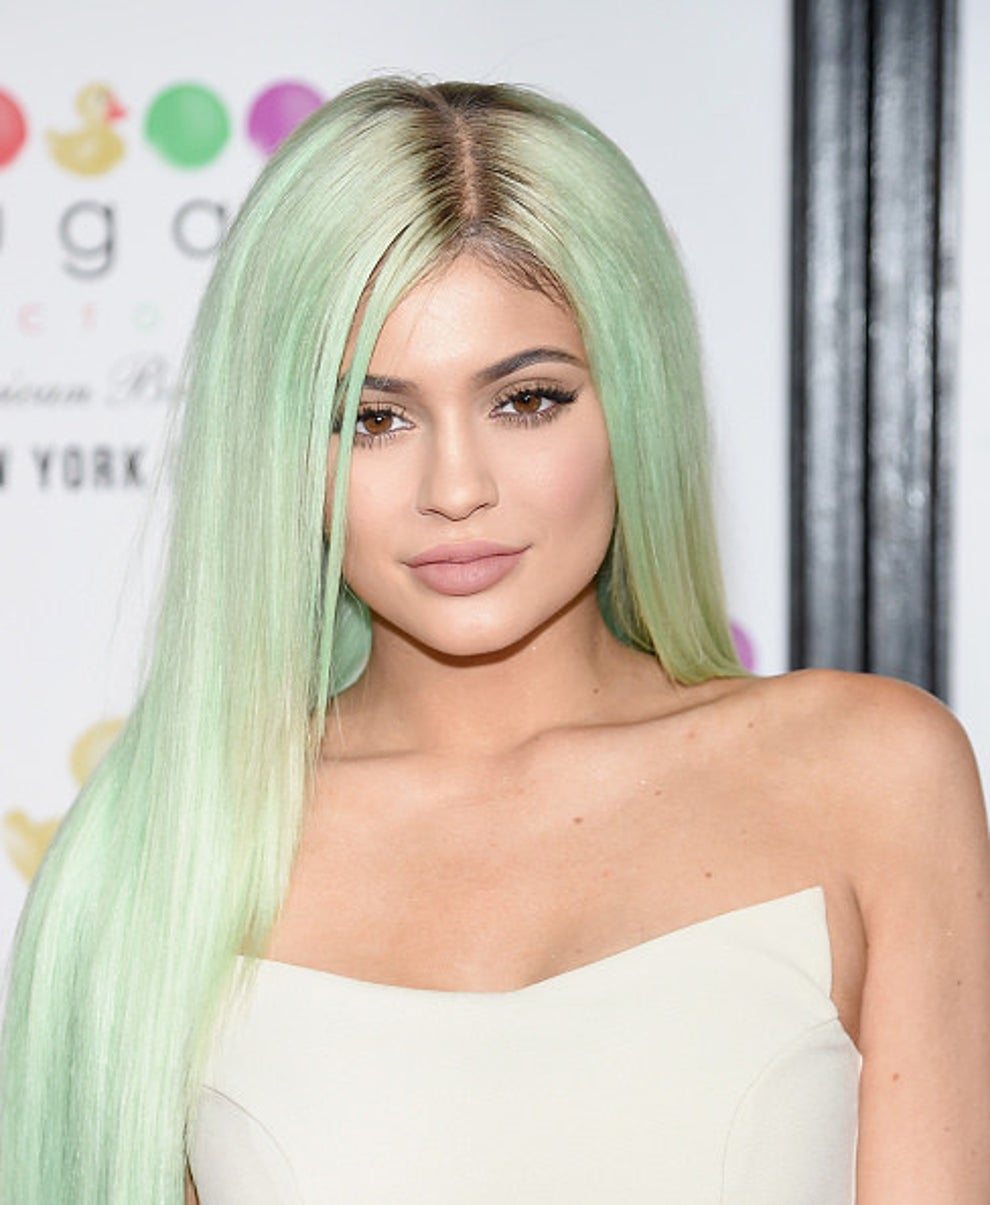 Kylie Jenner Doesn't Think She Looks Good With Brown Hair: Photo